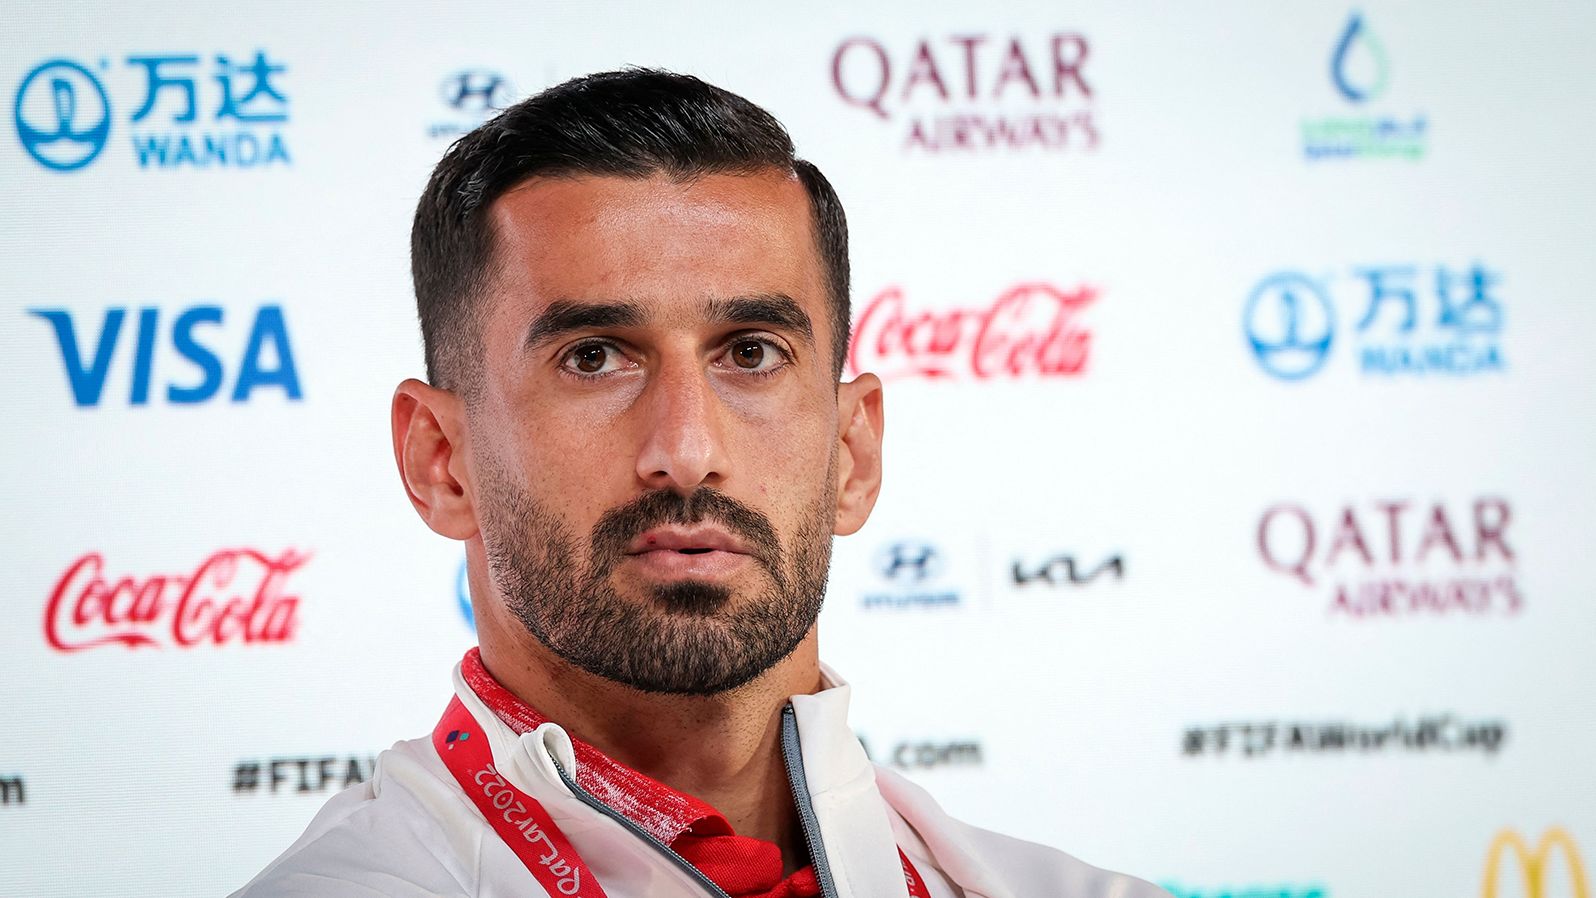 Iran defender Ehsan Hajsafi attends a press conference at the Qatar National Convention Center (QNCC) in Doha.